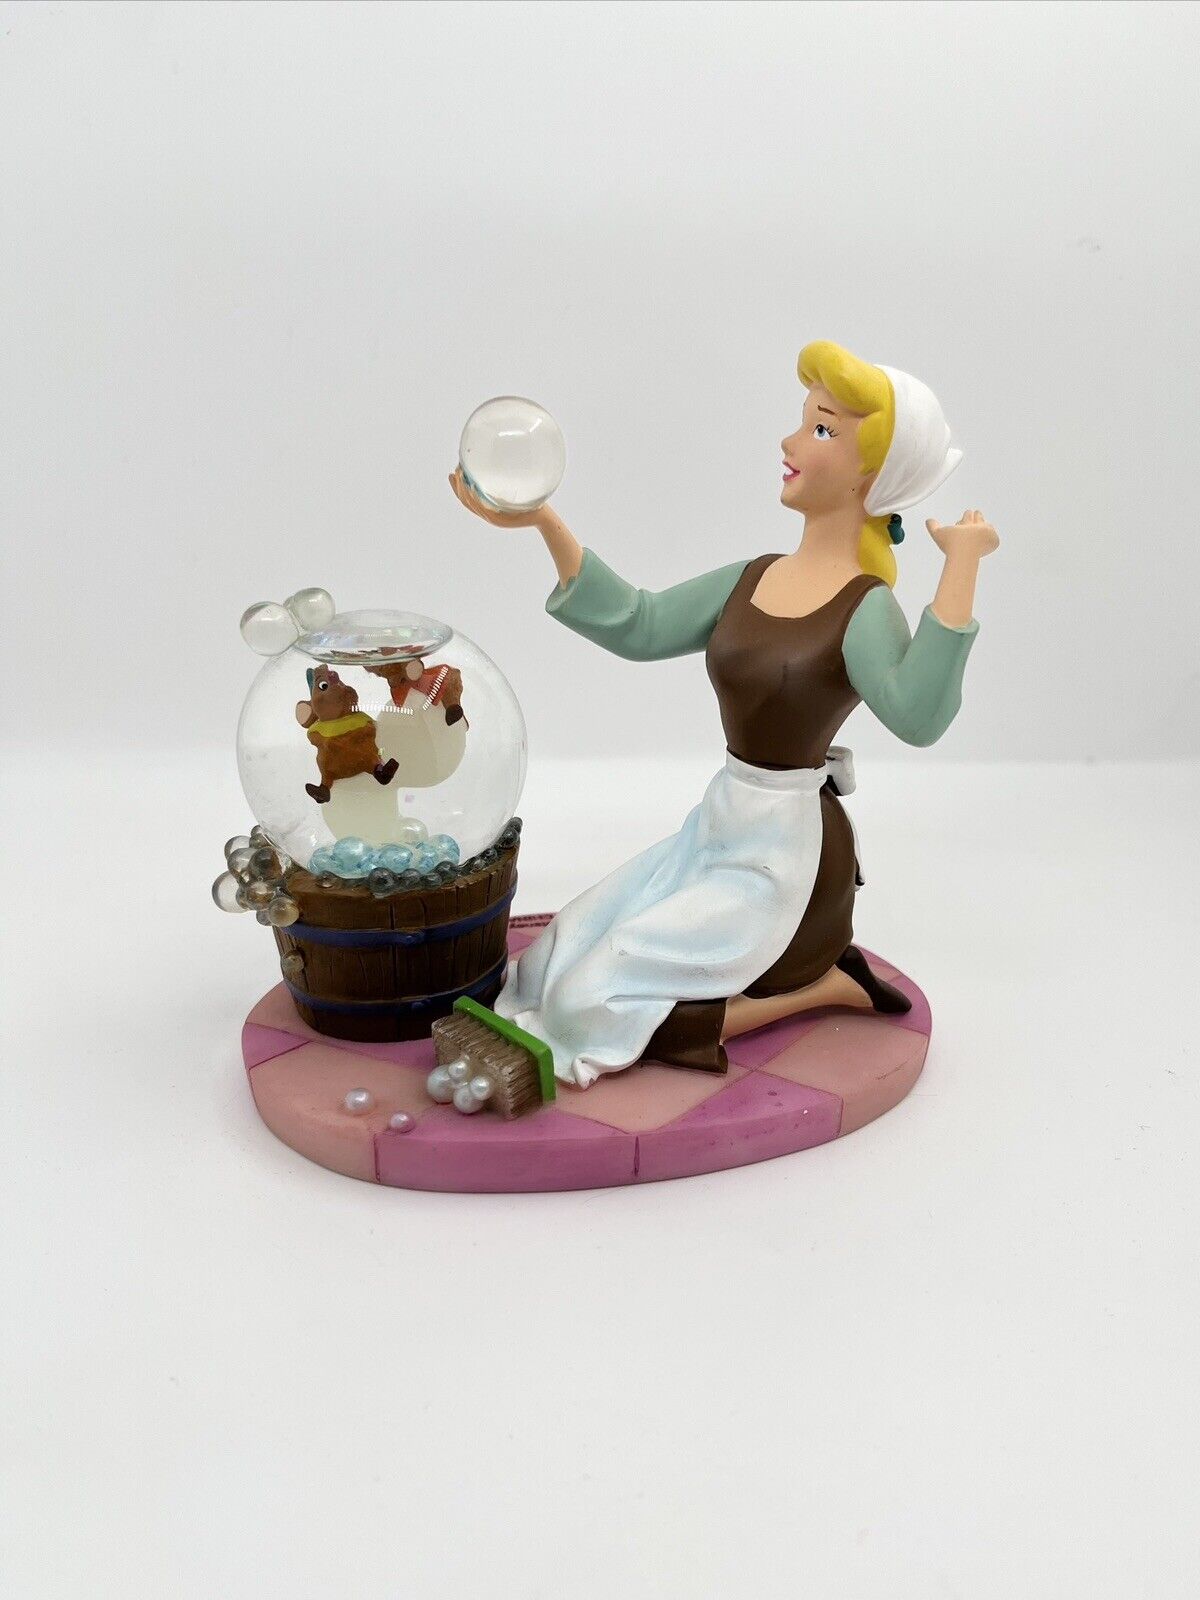 Disney Cinderella “Cleaning Bubbles” Snow Globe Gus n Jack Rare Collectable